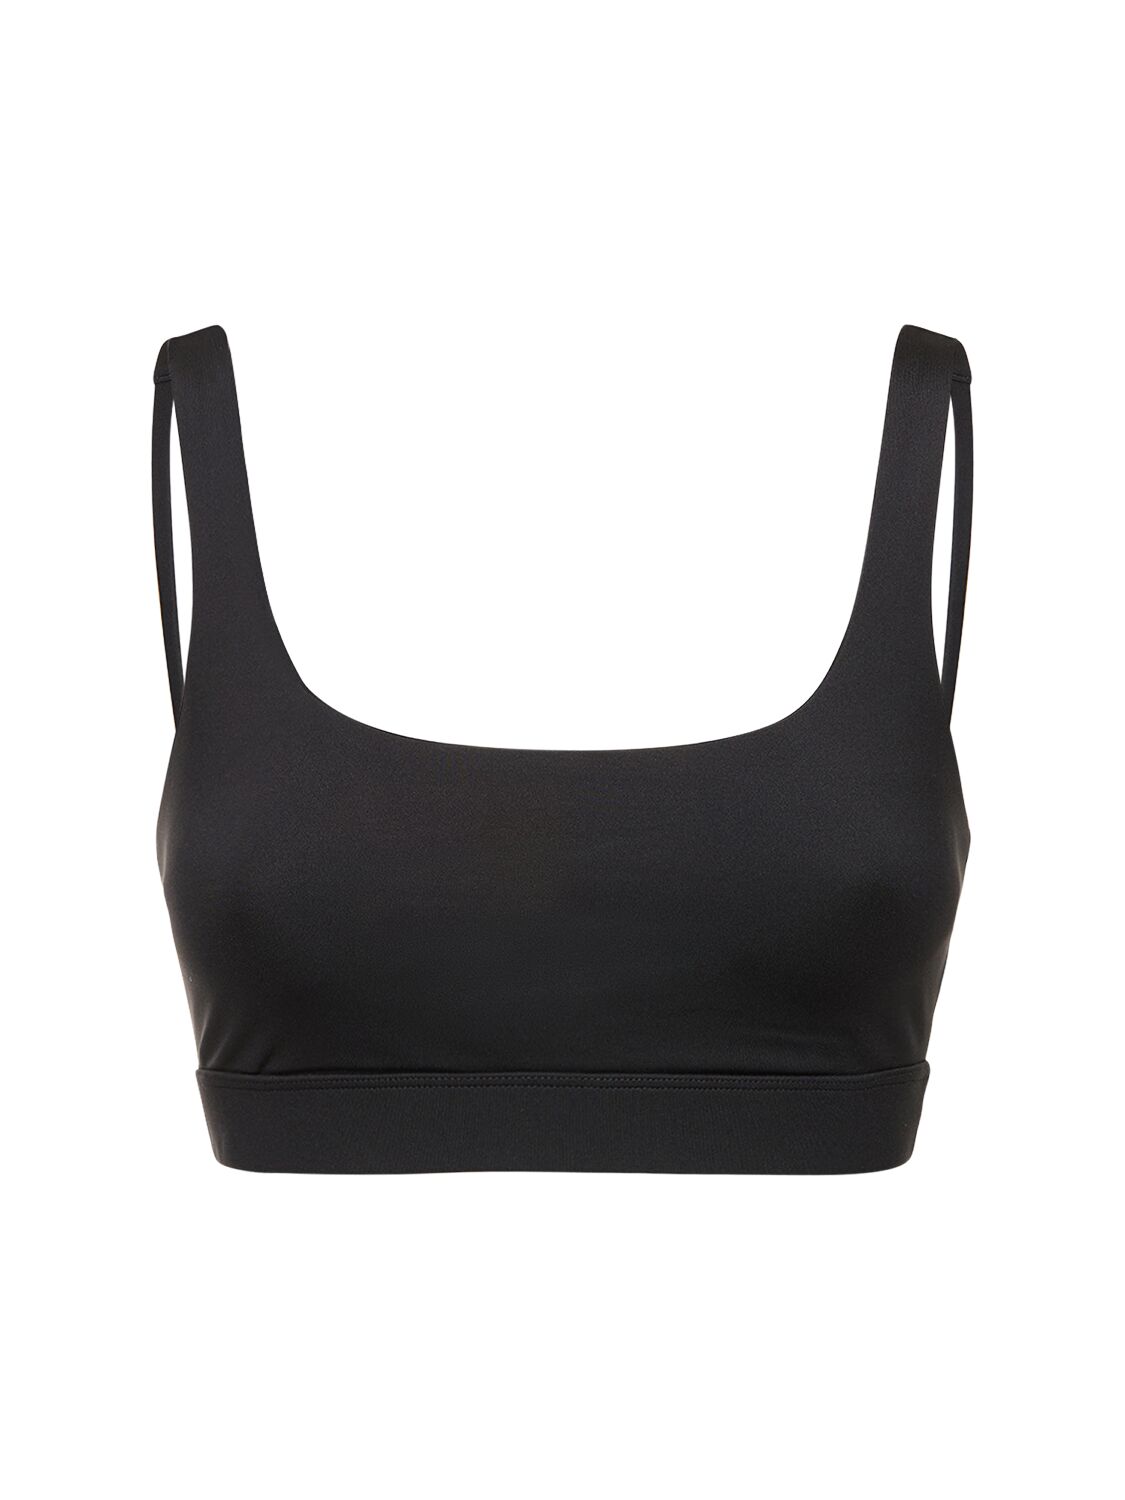 Girlfriend Collective Andy Stretch Tech Bra Top In Black